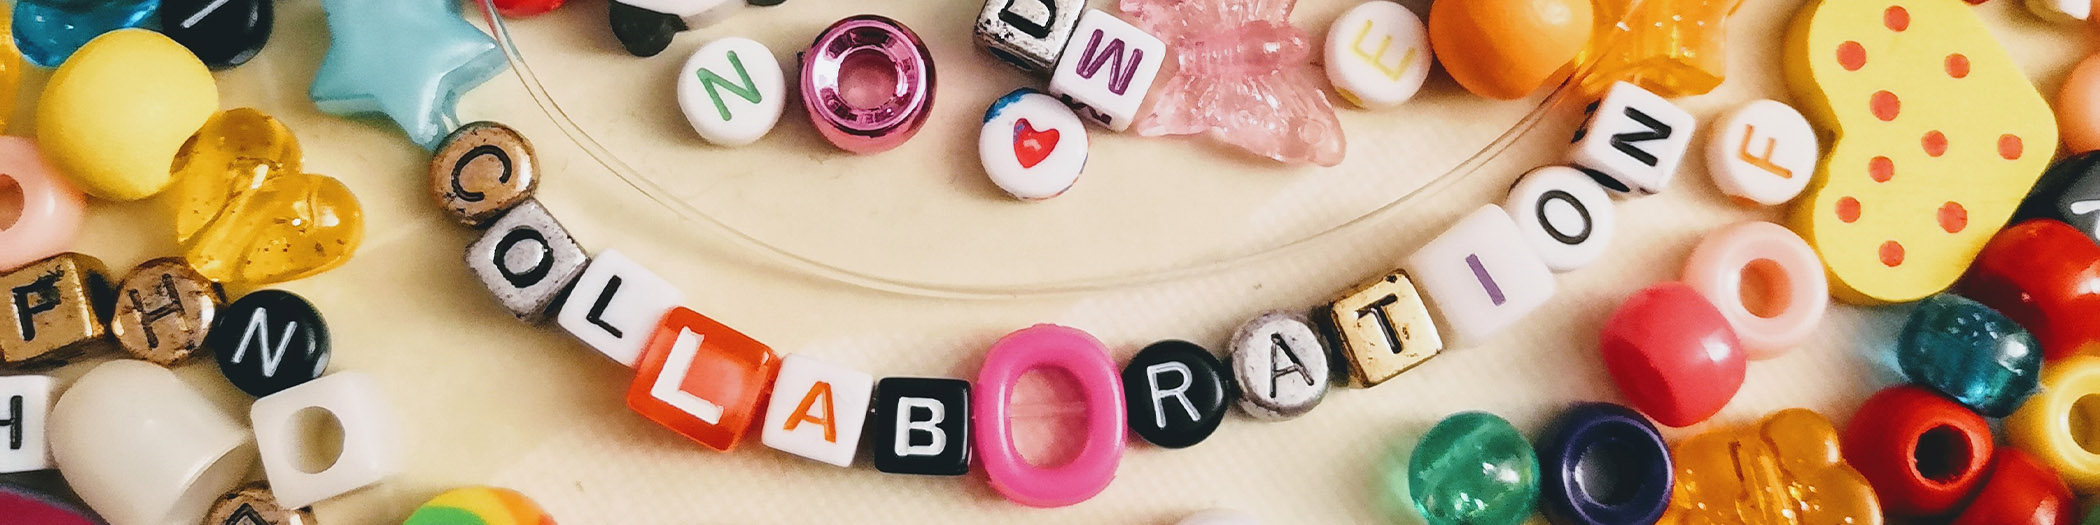 Beads spelling out 'Collaboration'